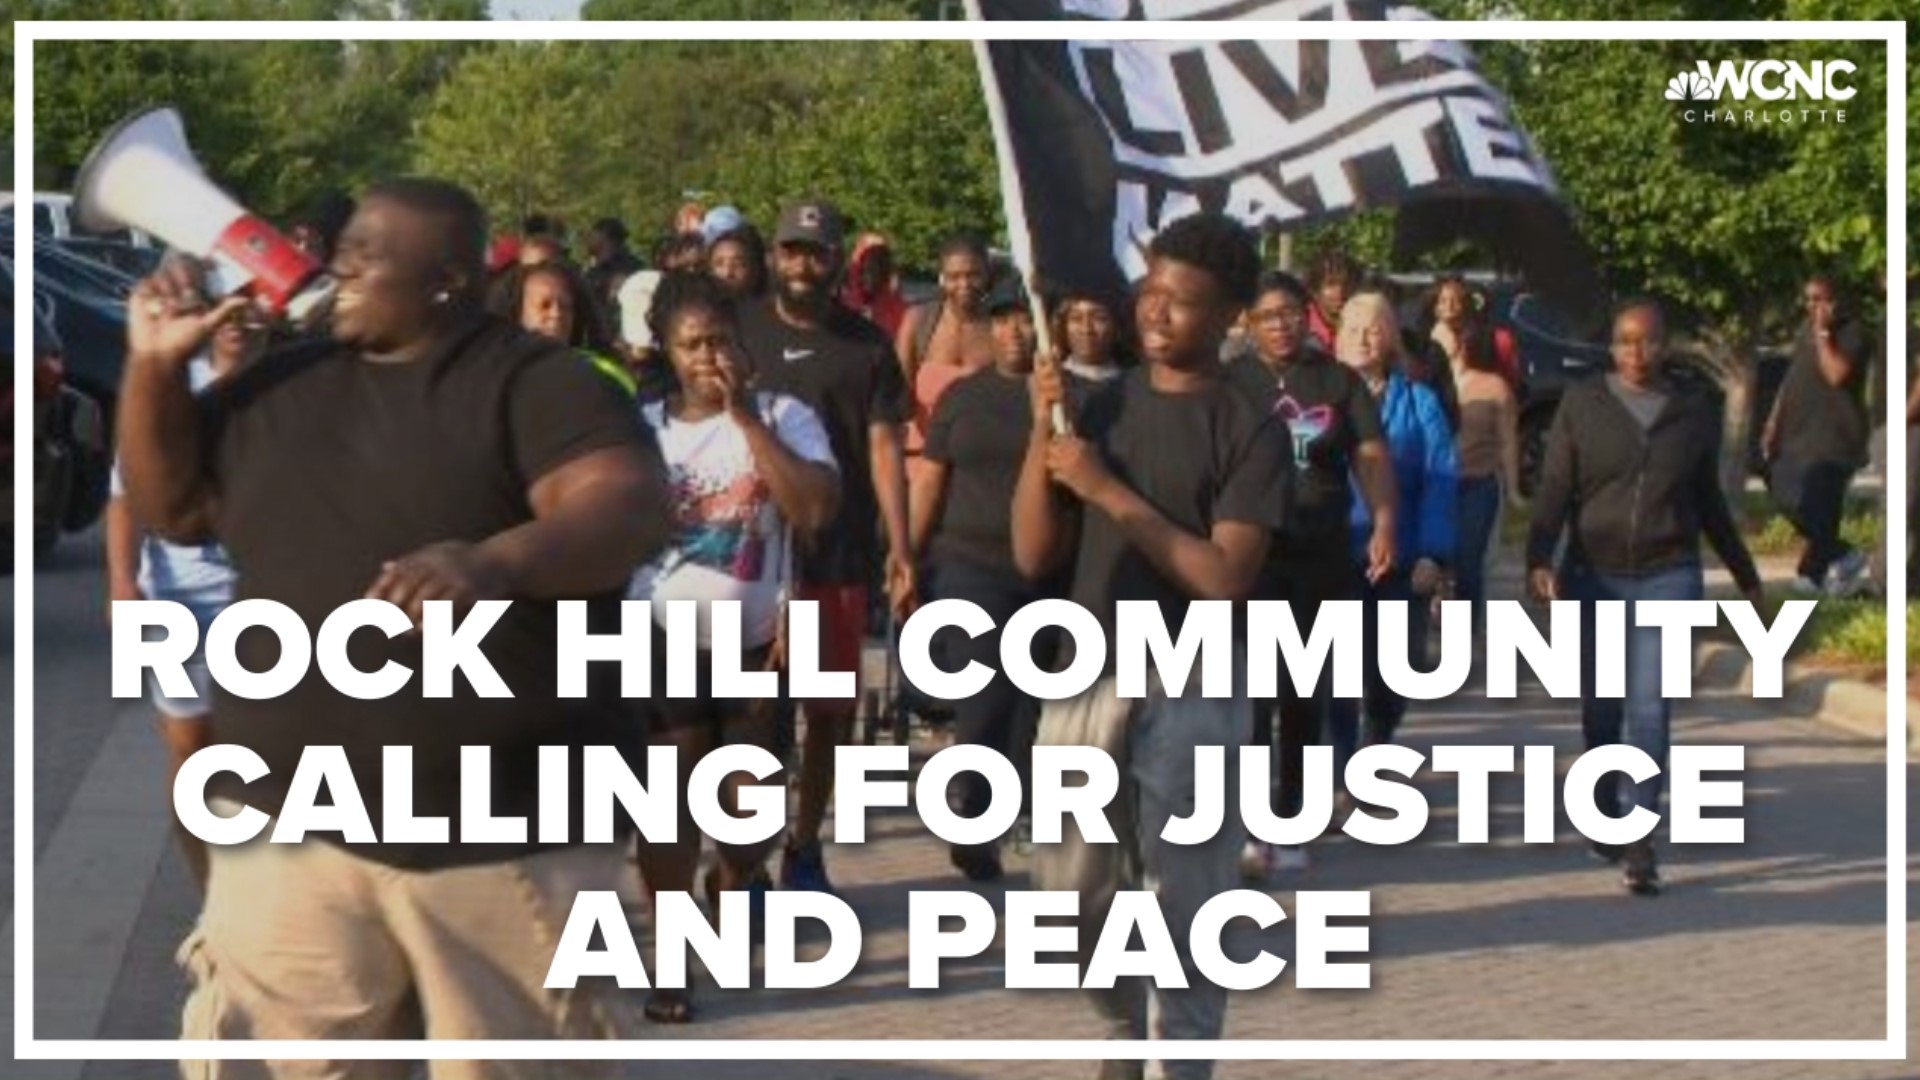 Just days after police said three teens died in a gun fight, the Rock Hill community is calling for justice and peace.